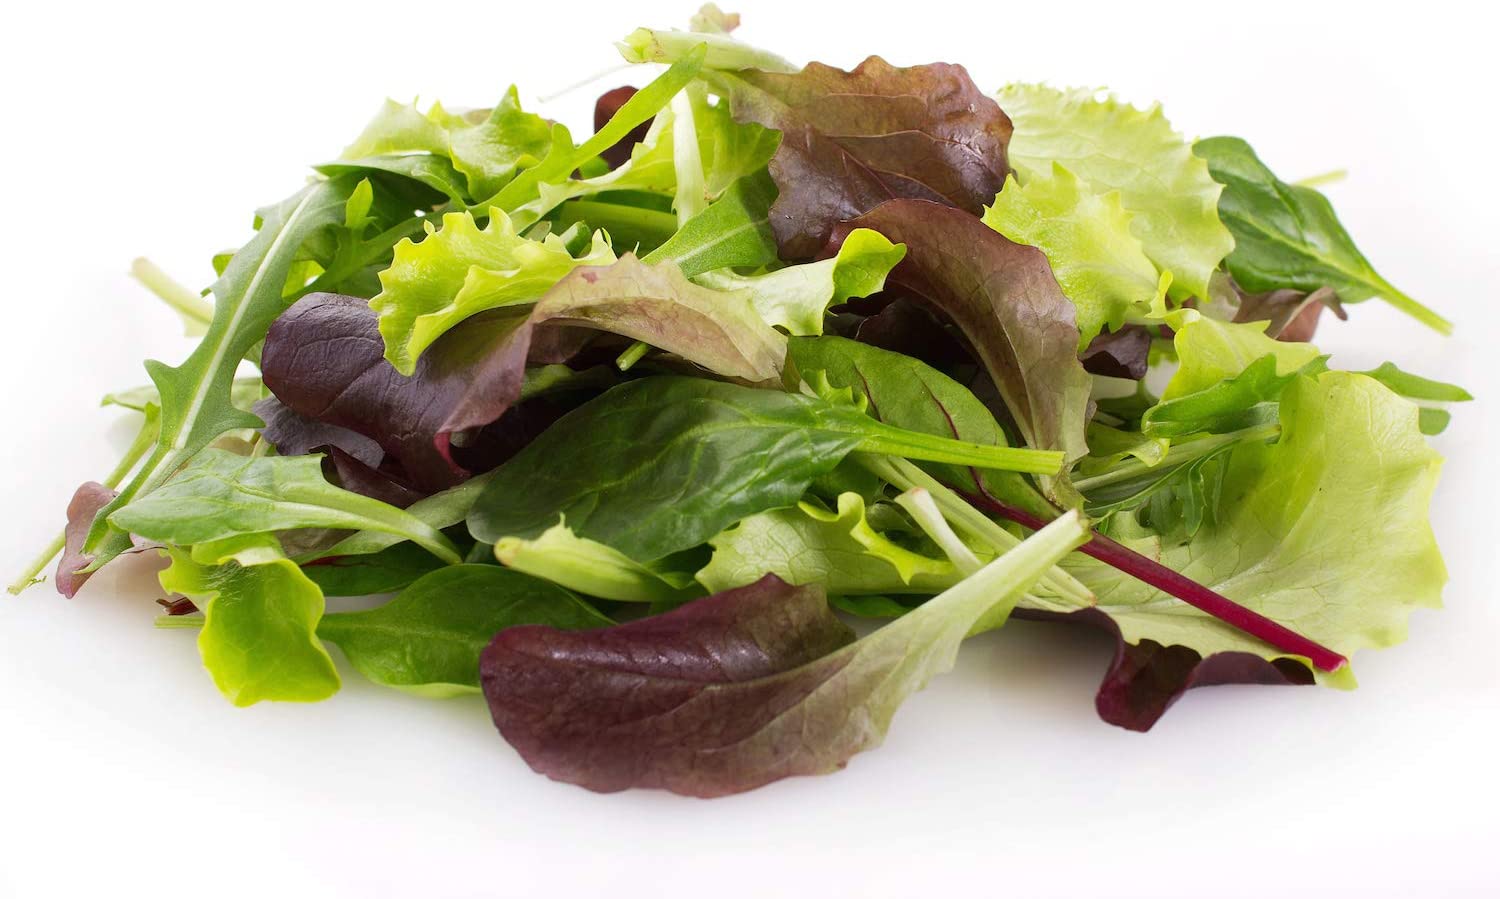 Mixed Greens Lettuce Variety, 500 Heirloom Seeds Per Packet, Non GMO Seeds